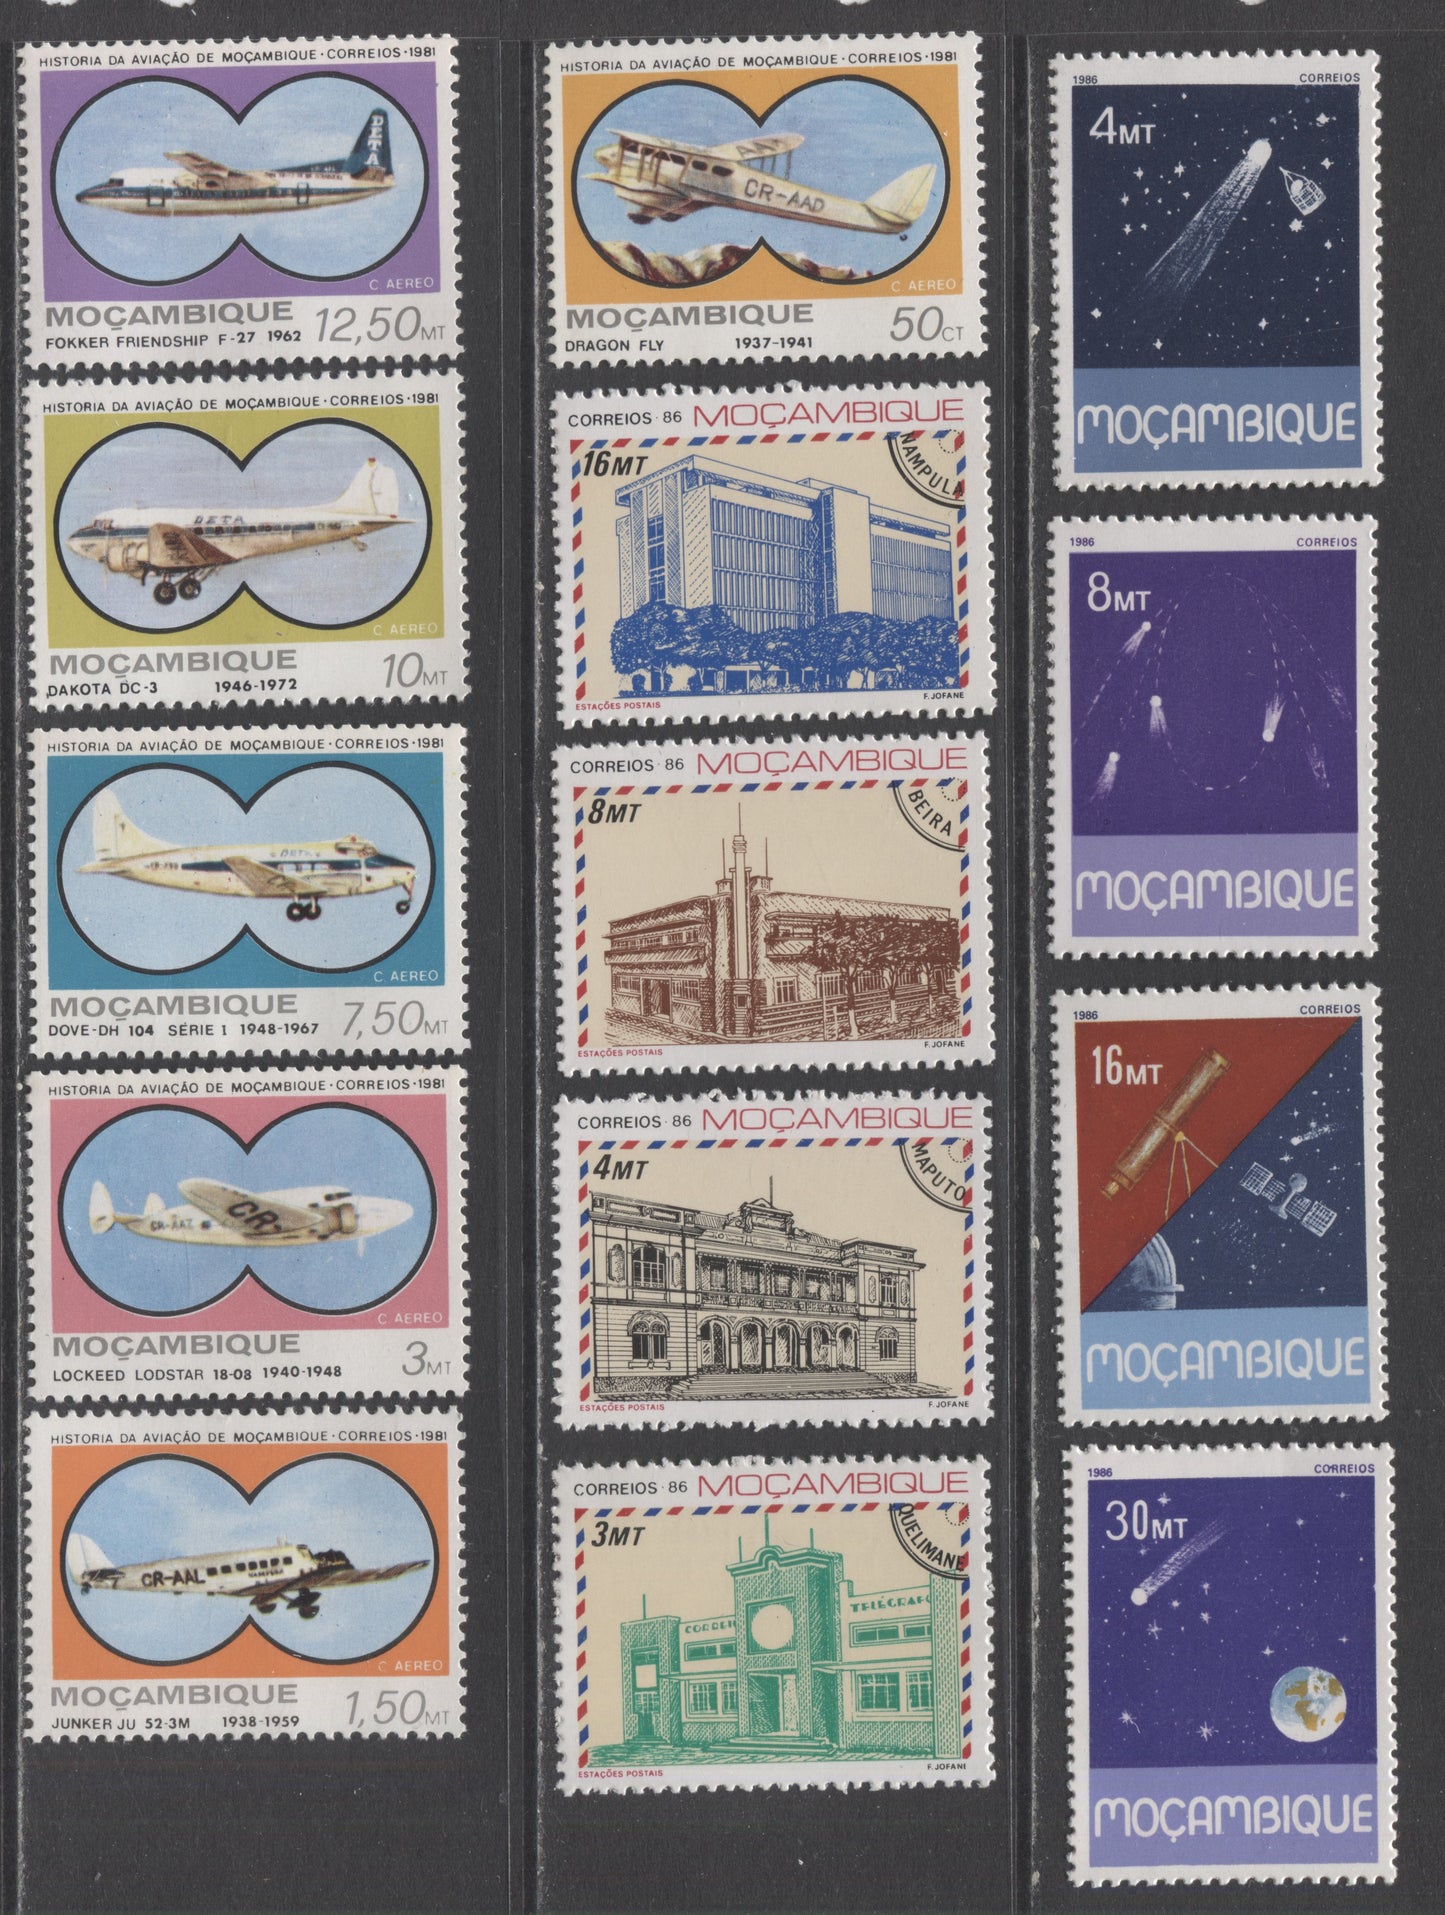 Lot 228 Mozambique SC#678/C44 1981-1986 Commemoratives & Airmails, A VFNH Range Of Singles, 2017 Scott Cat. $23.35 USD, Click on Listing to See ALL Pictures